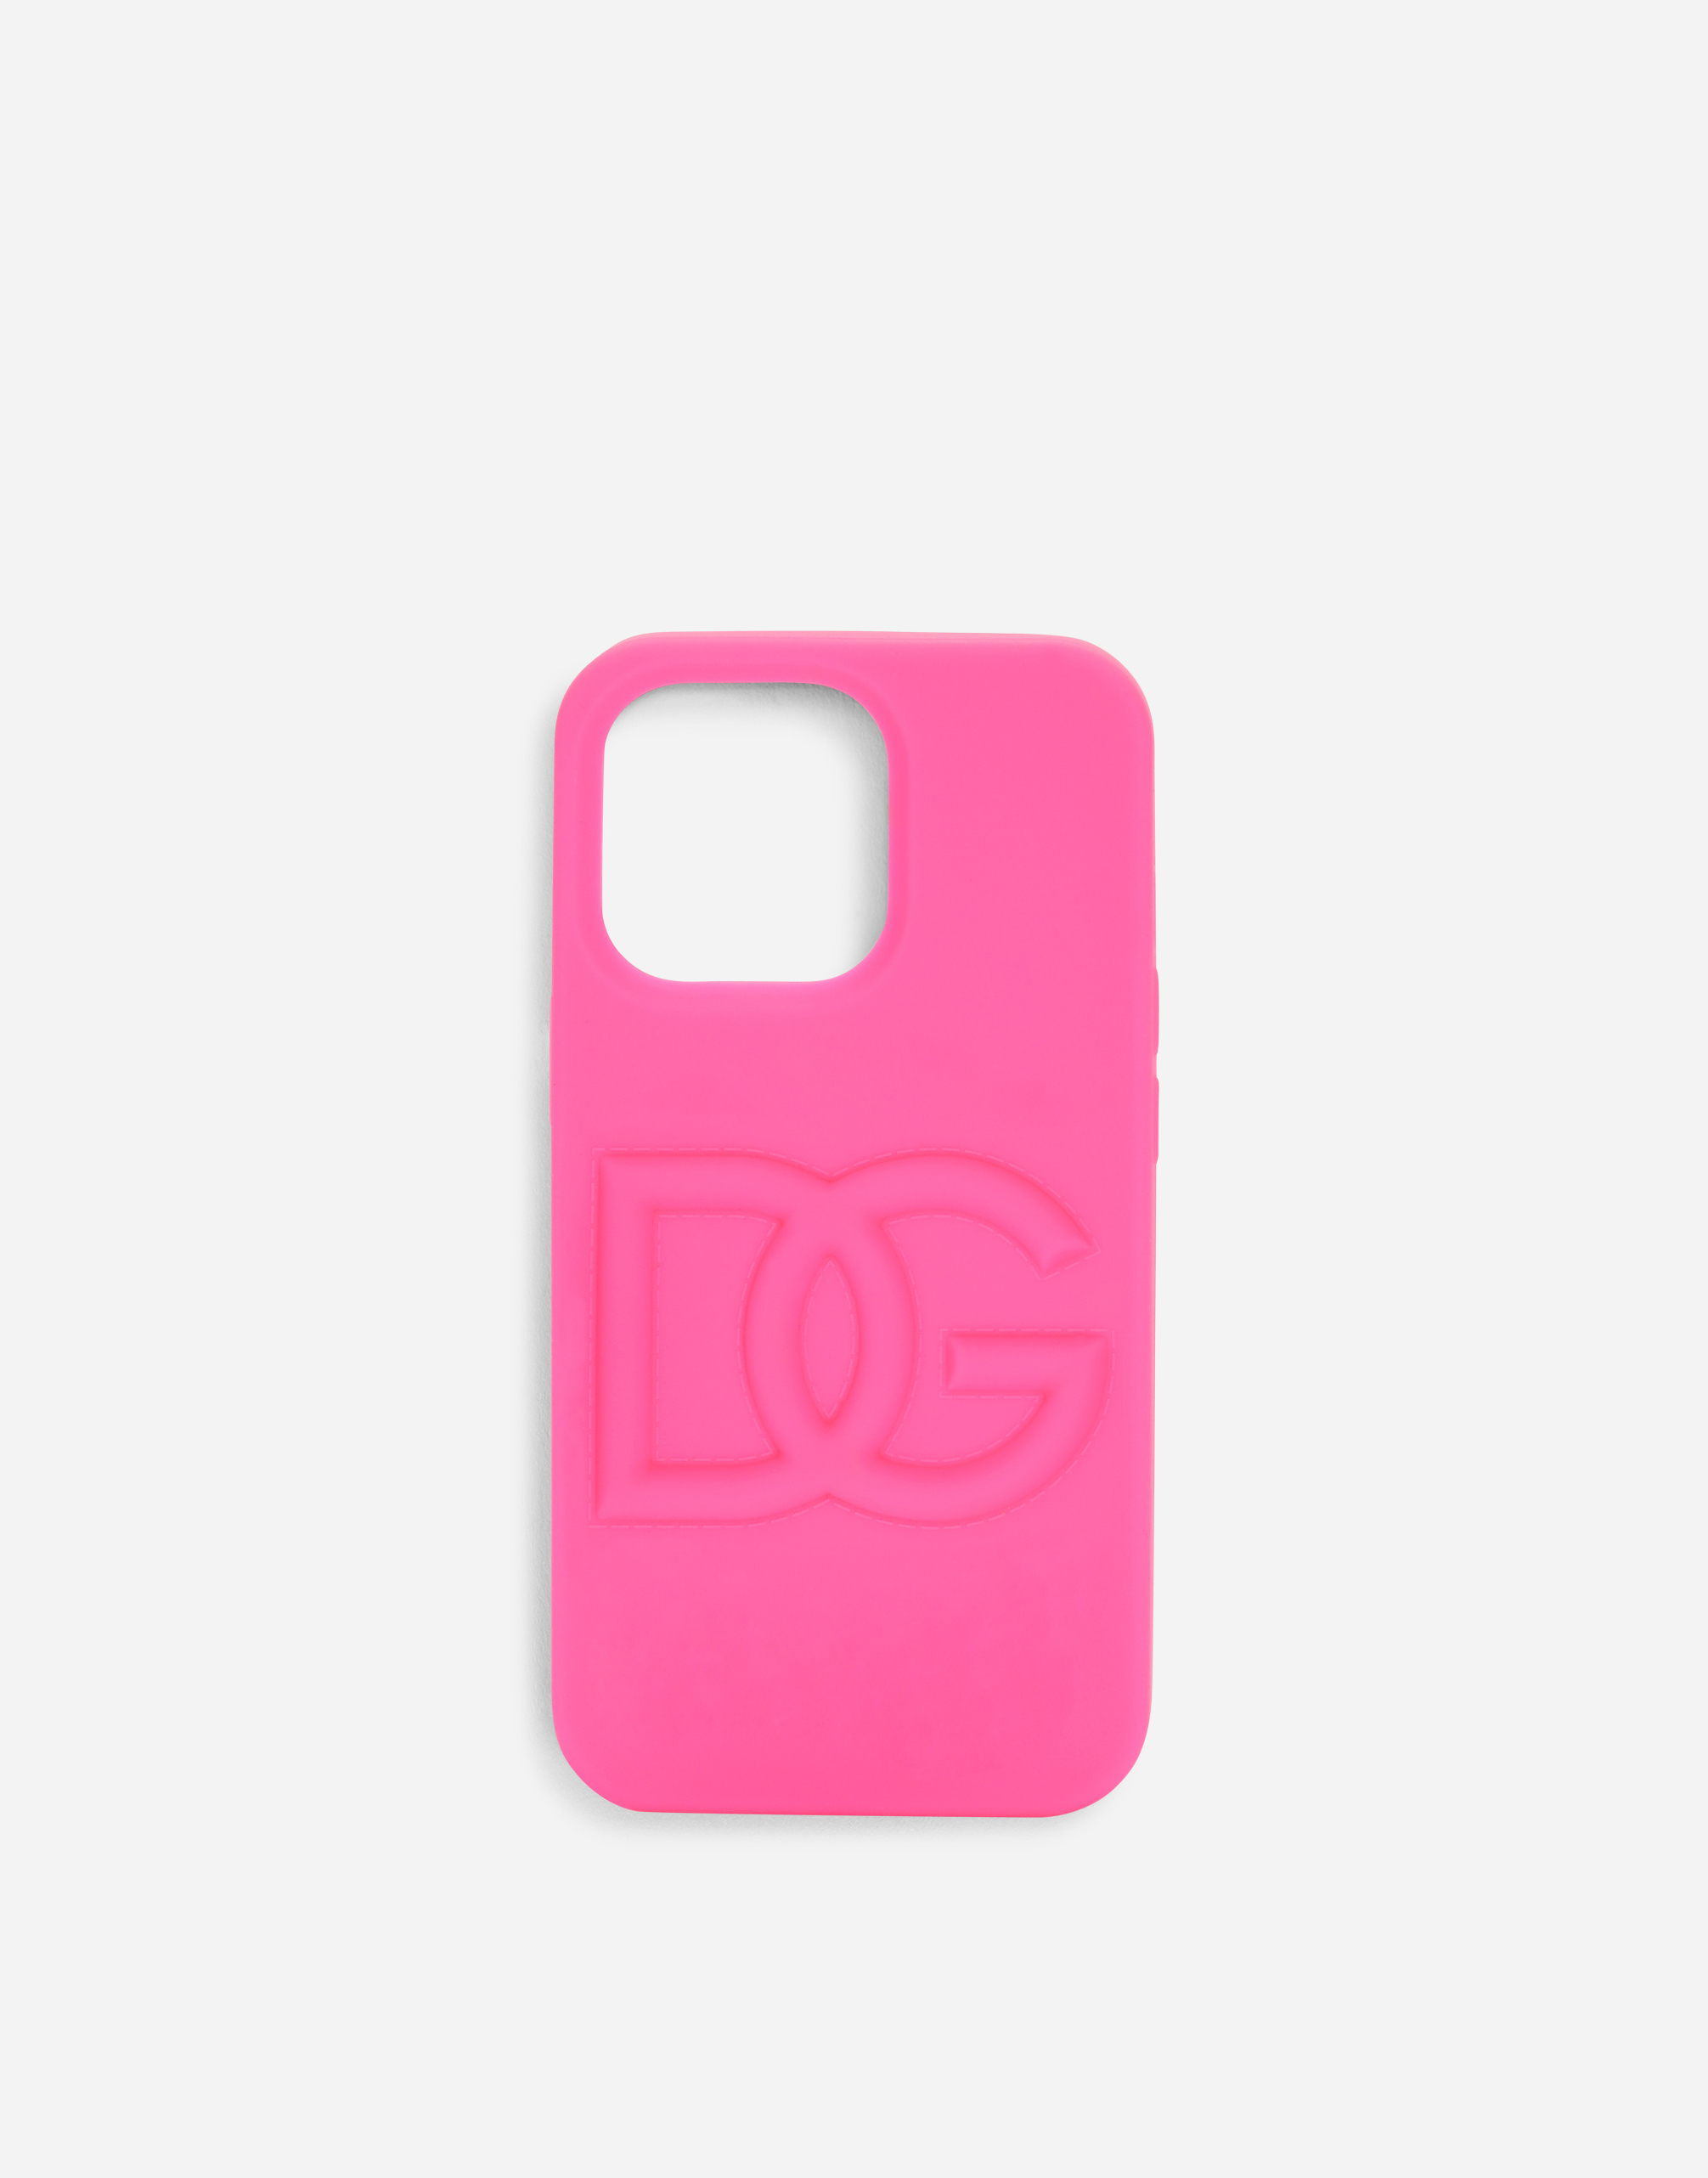 Branded rubber iPhone 13 Pro cover in Fuchsia